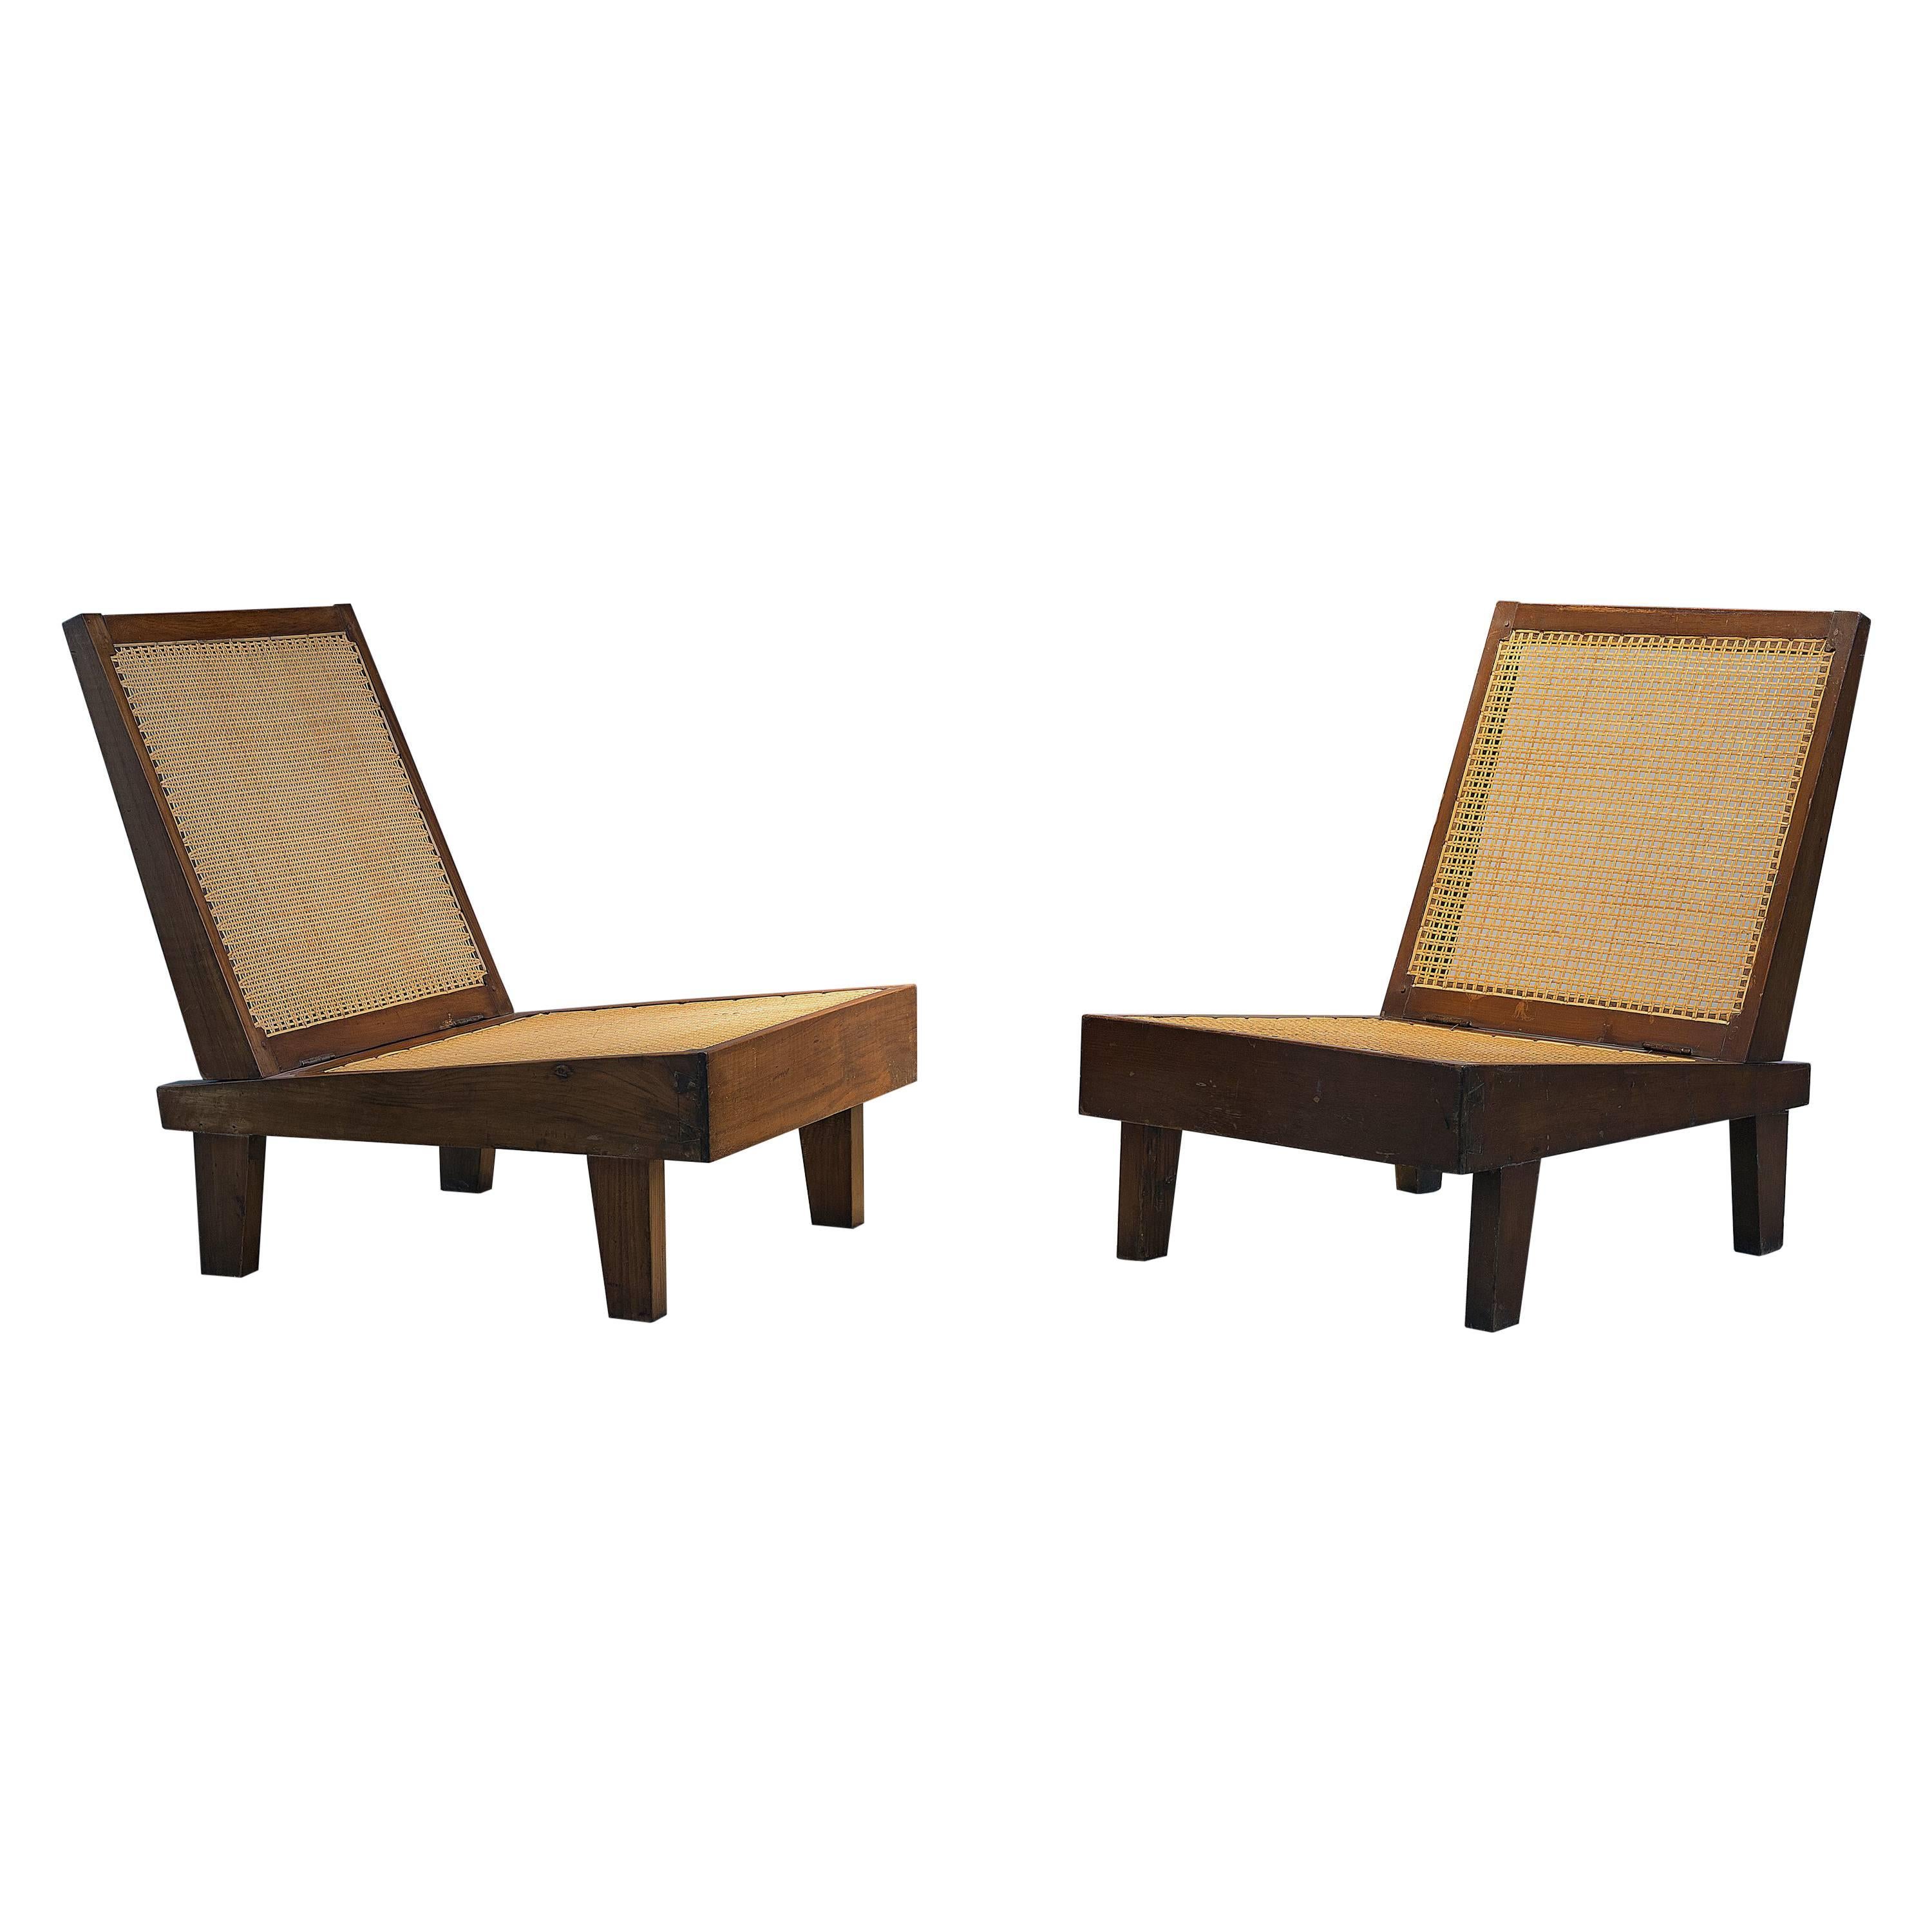 Pierre Jeanneret, Folding Chairs, PJ-SI-61-A, Chandigarh, Teak and Cane